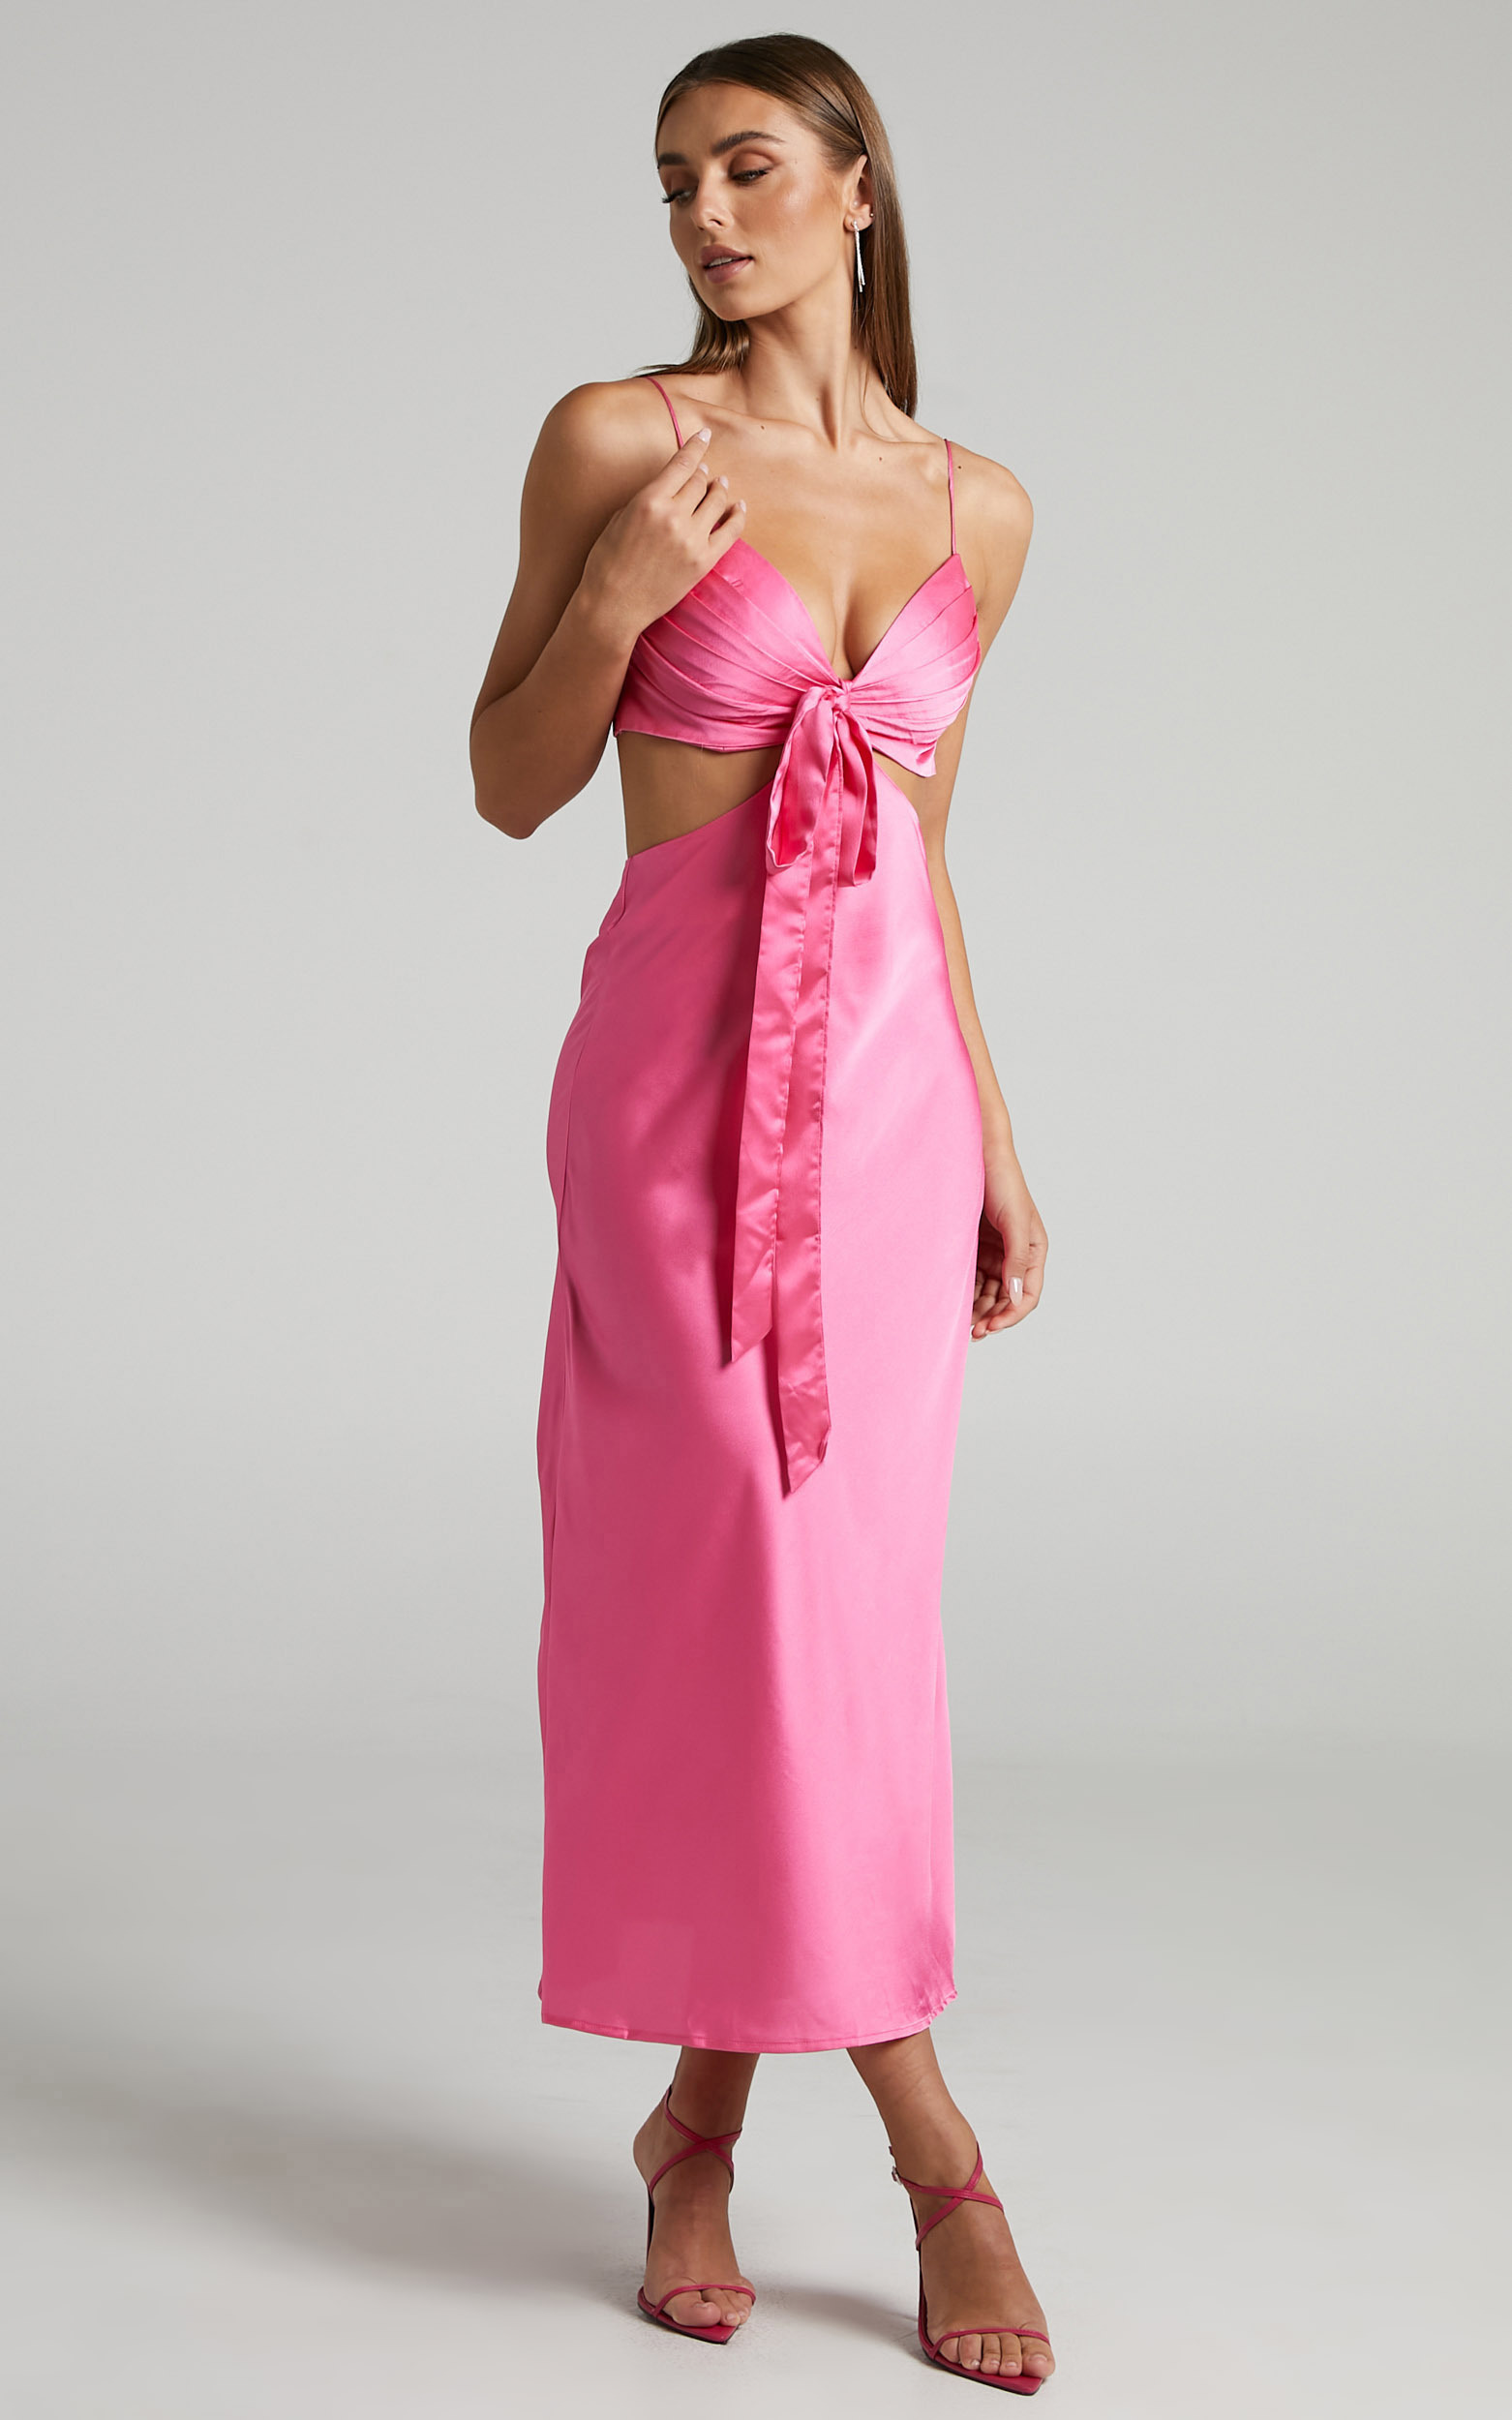 Melany Midi Dress - Pleated Bust Cut Out Tie Detail Satin Slip Dress in Pink - XS, PNK1, hi-res image number null